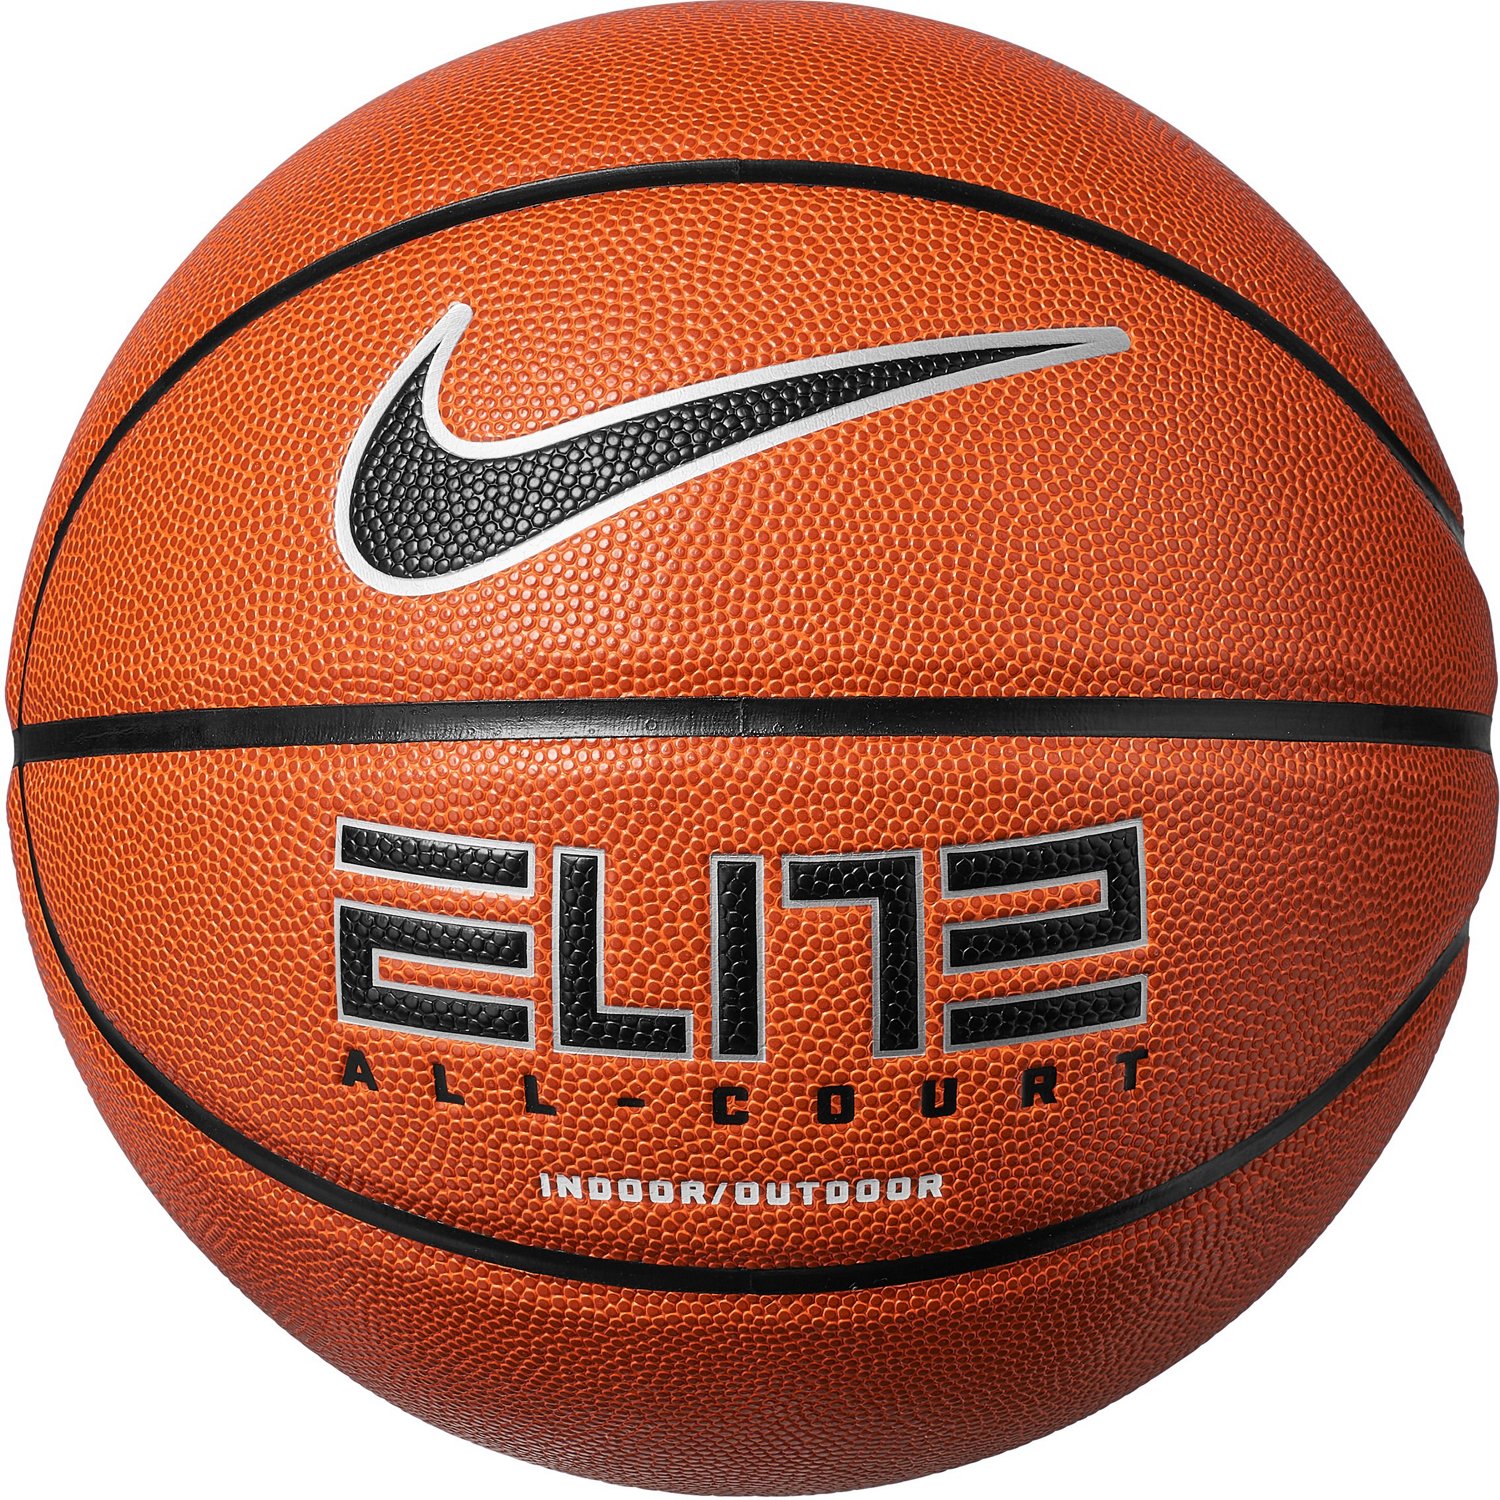 Nike Elite All Court 8P Q3 Basketball Free Shipping at Academy